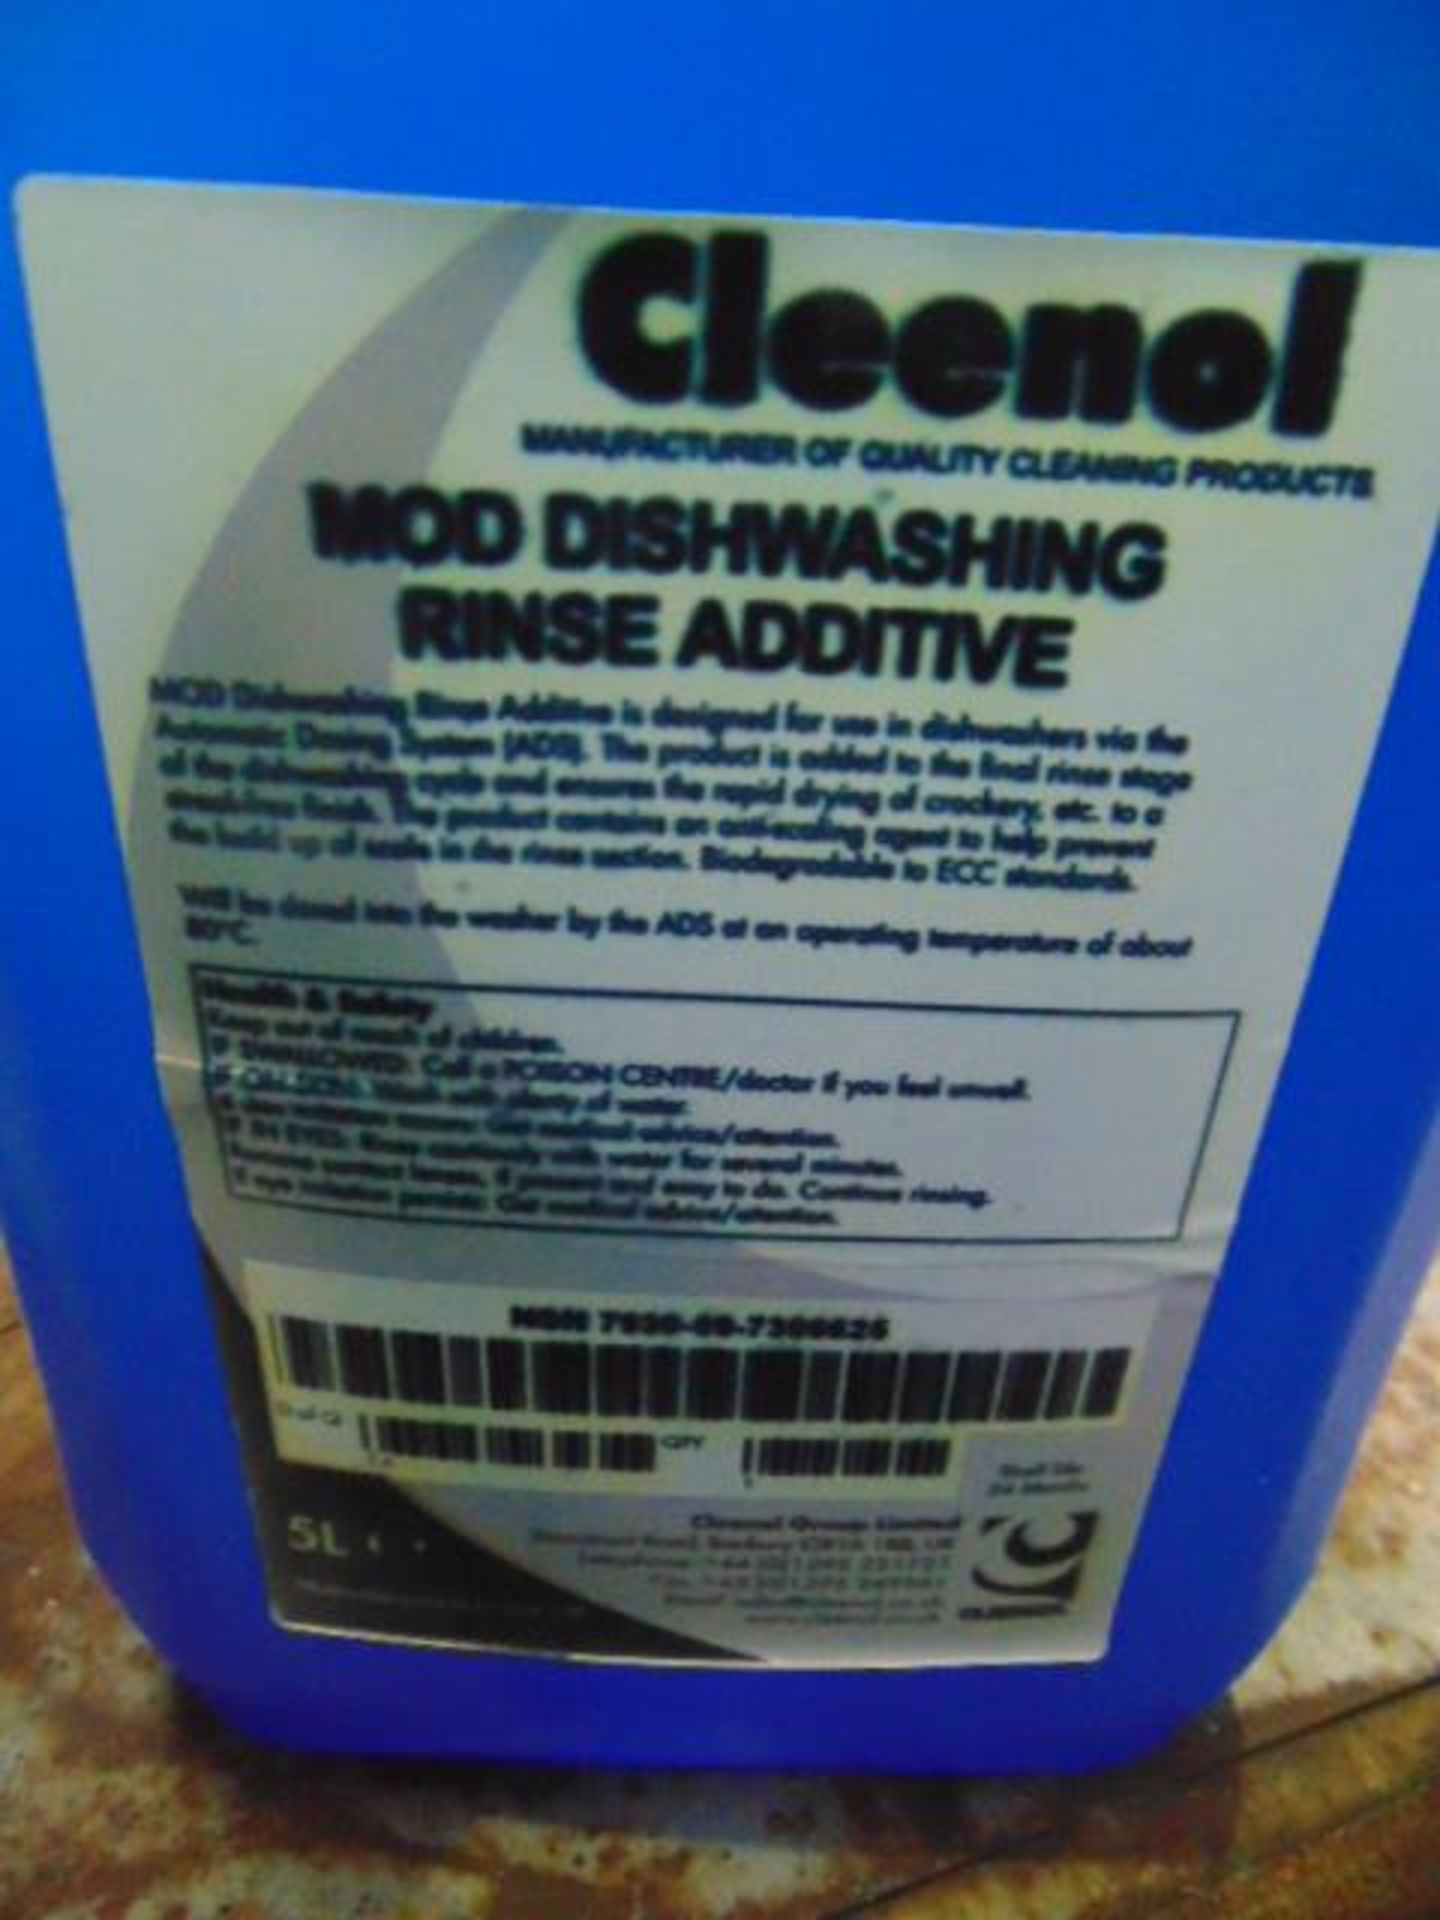 Qty 13 x 5 Ltr Cleenol Mod Dishwashing Additive direct from reserve stores - Image 2 of 2